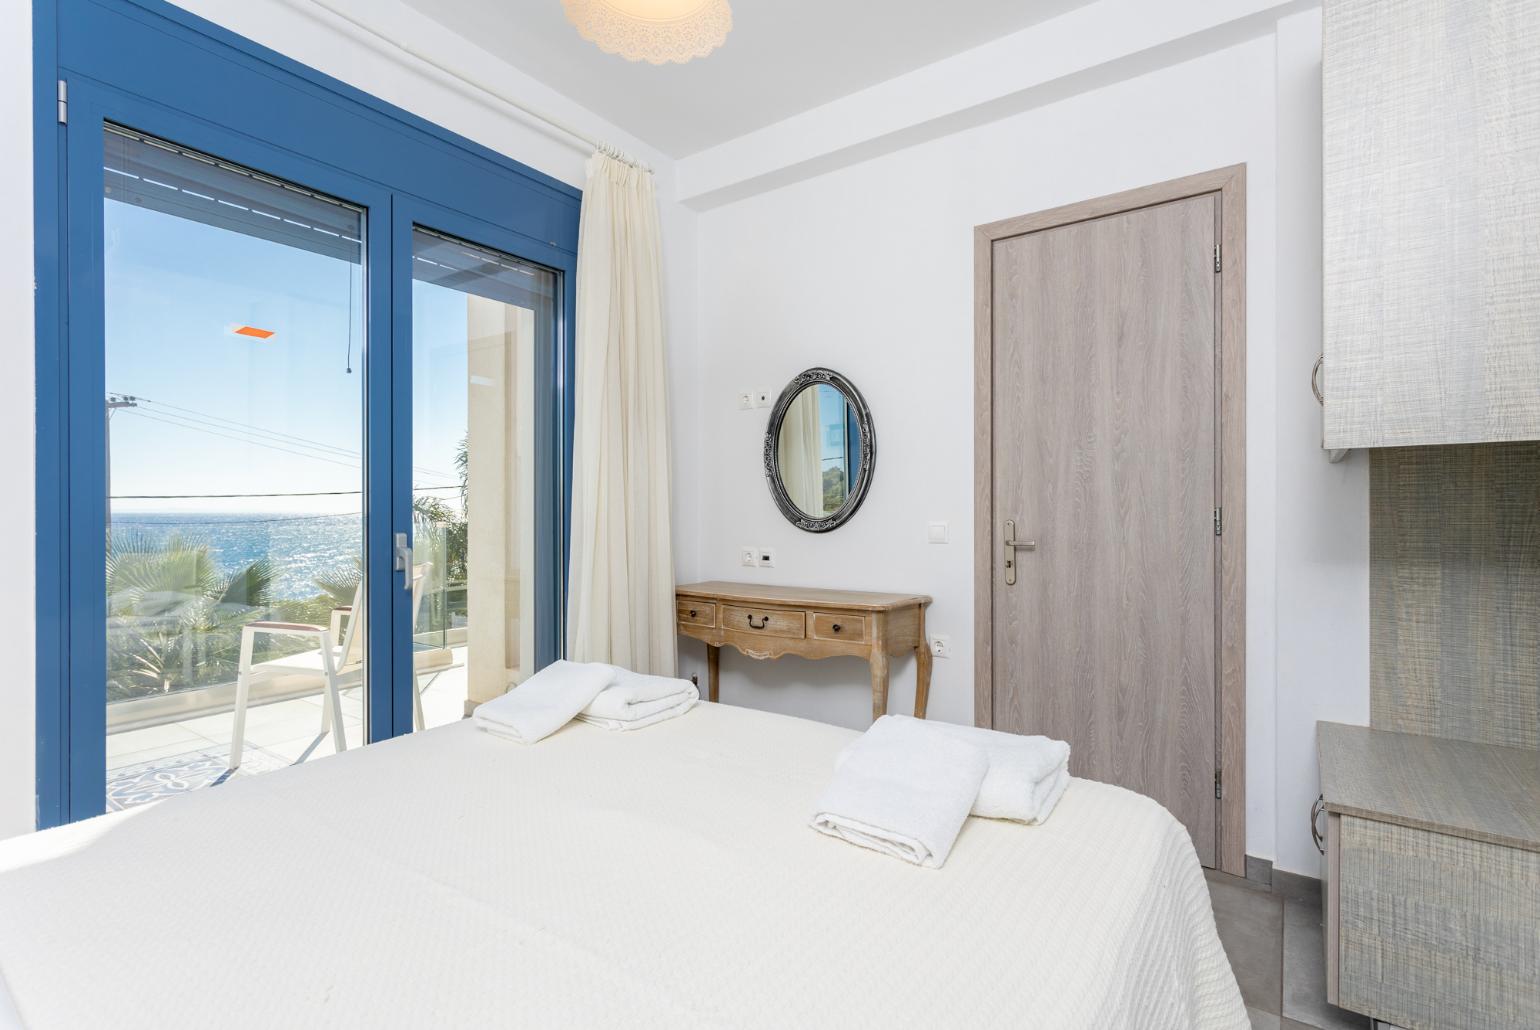 Double bedroom with A/C, sea views, and upper terrace access